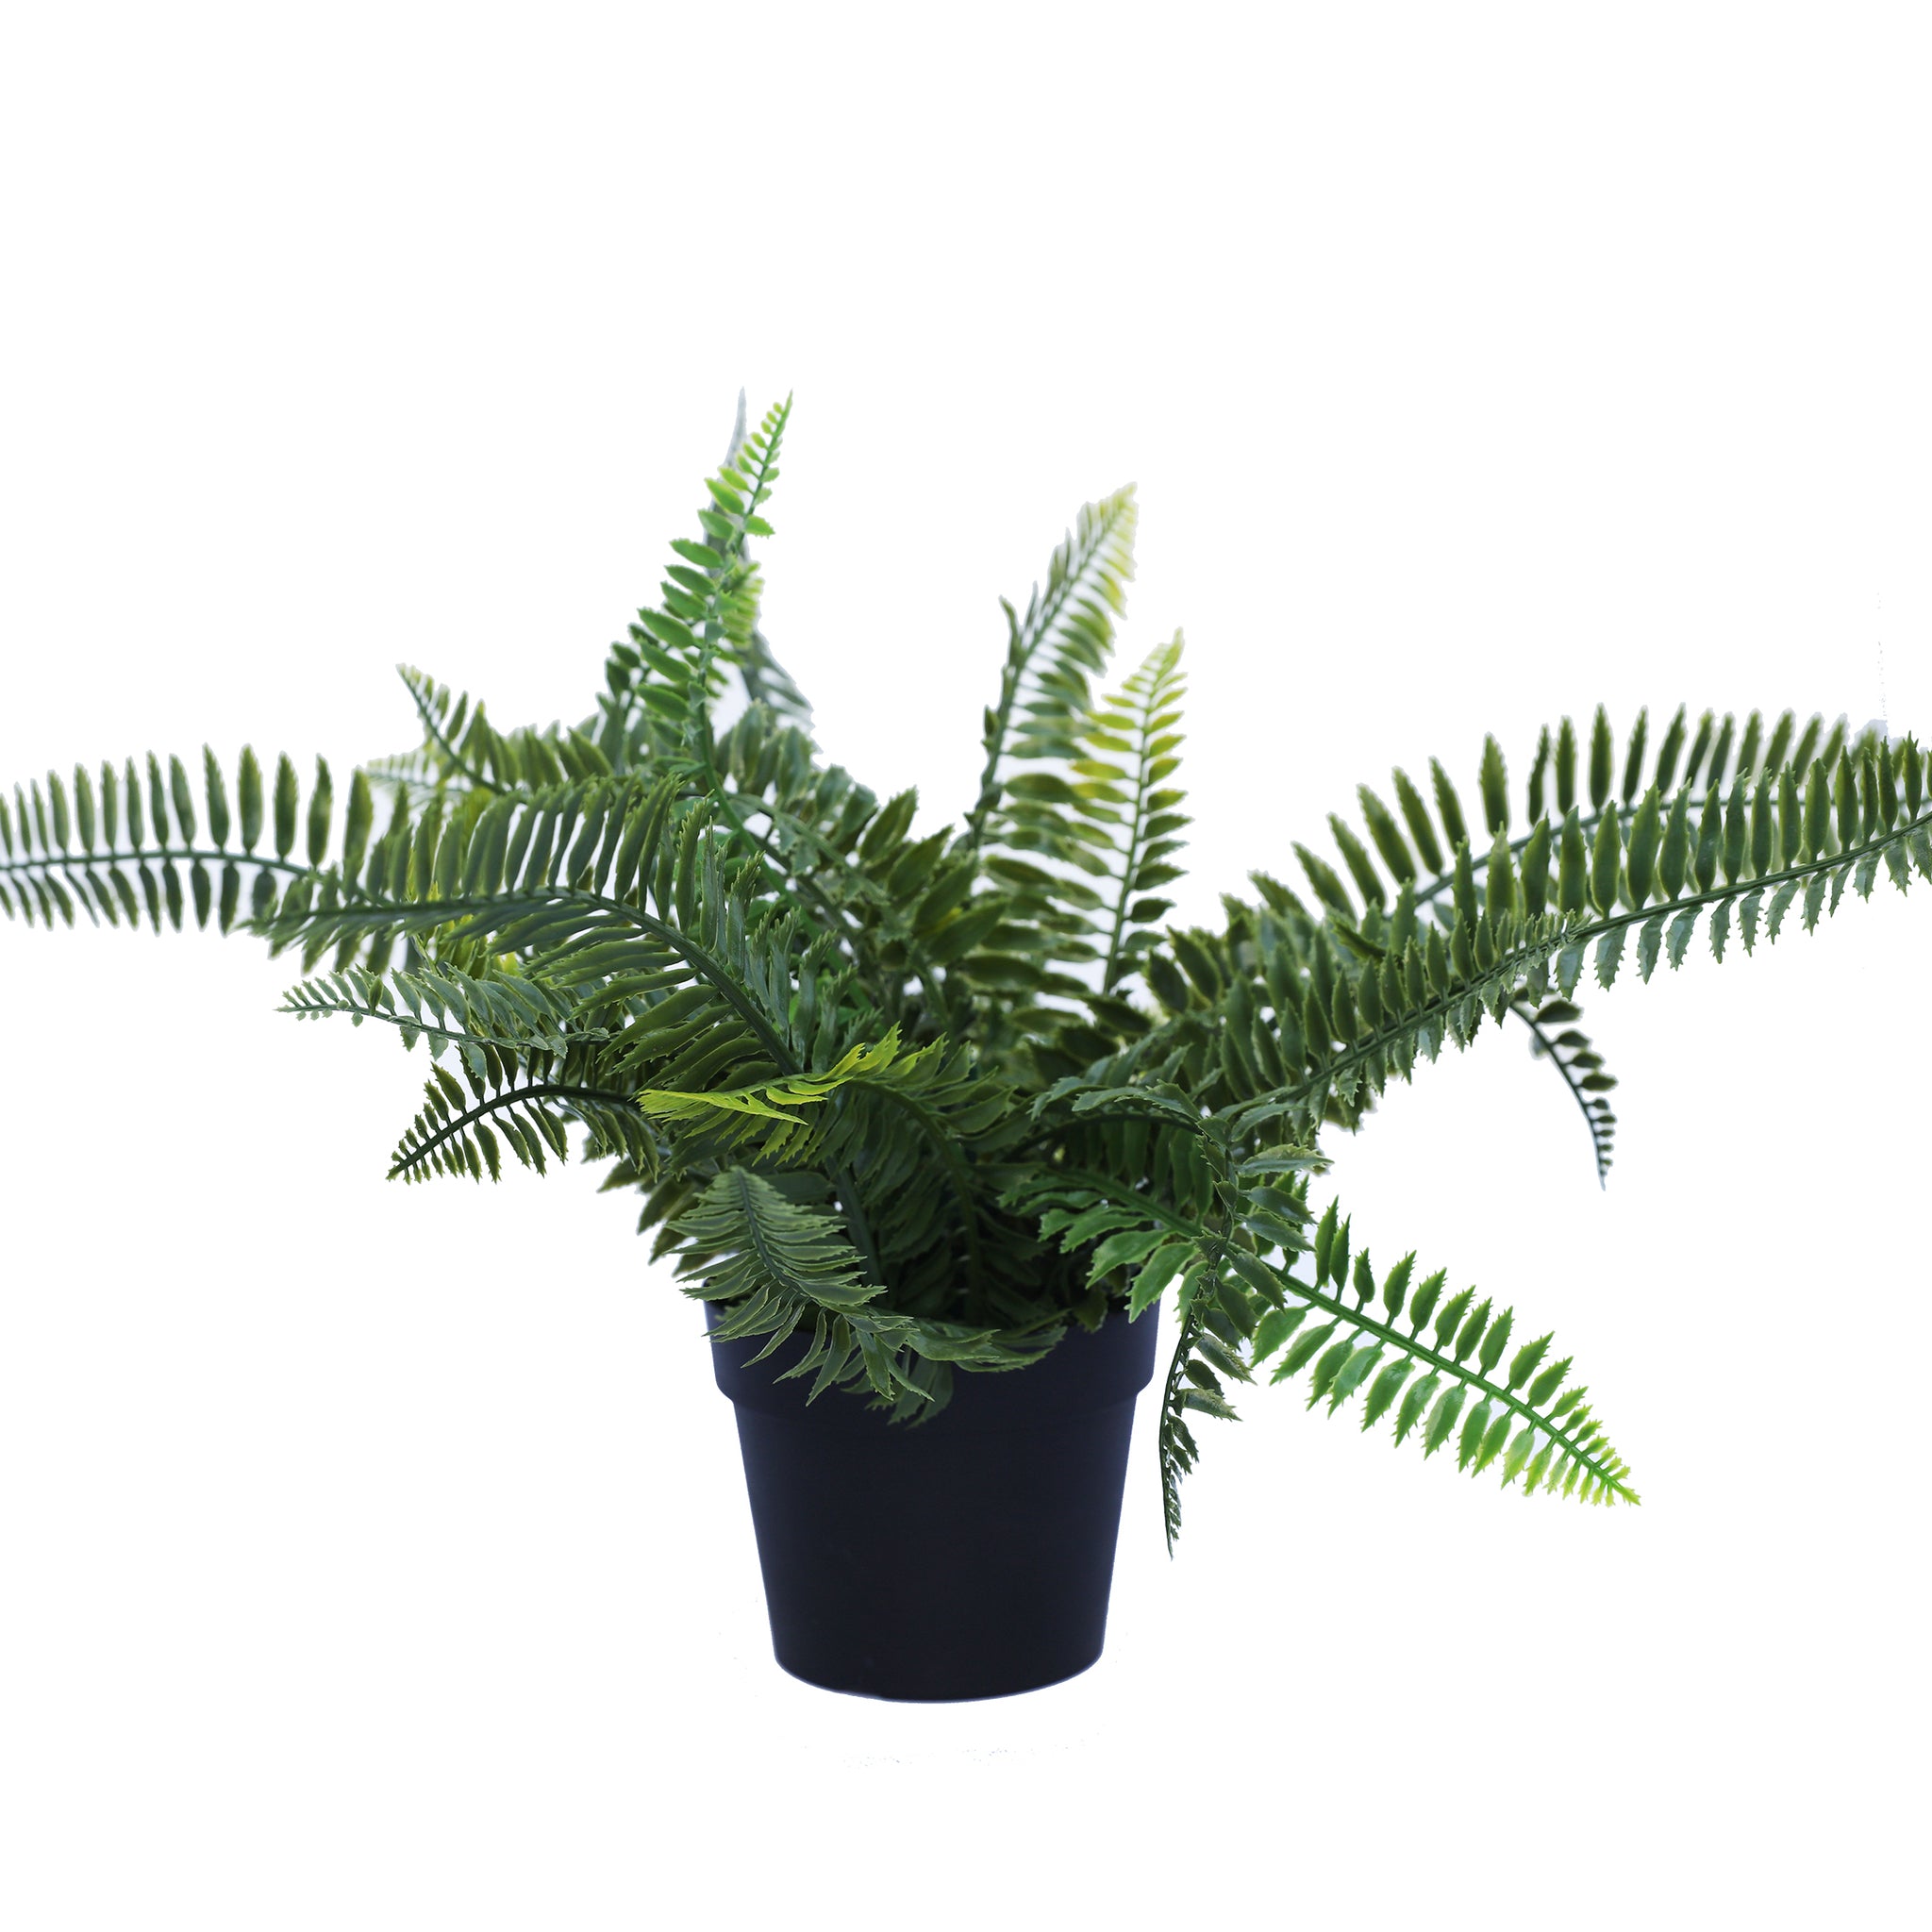 Small Potted Artificial Dark Green Fern Plant UV Resistant 20cm